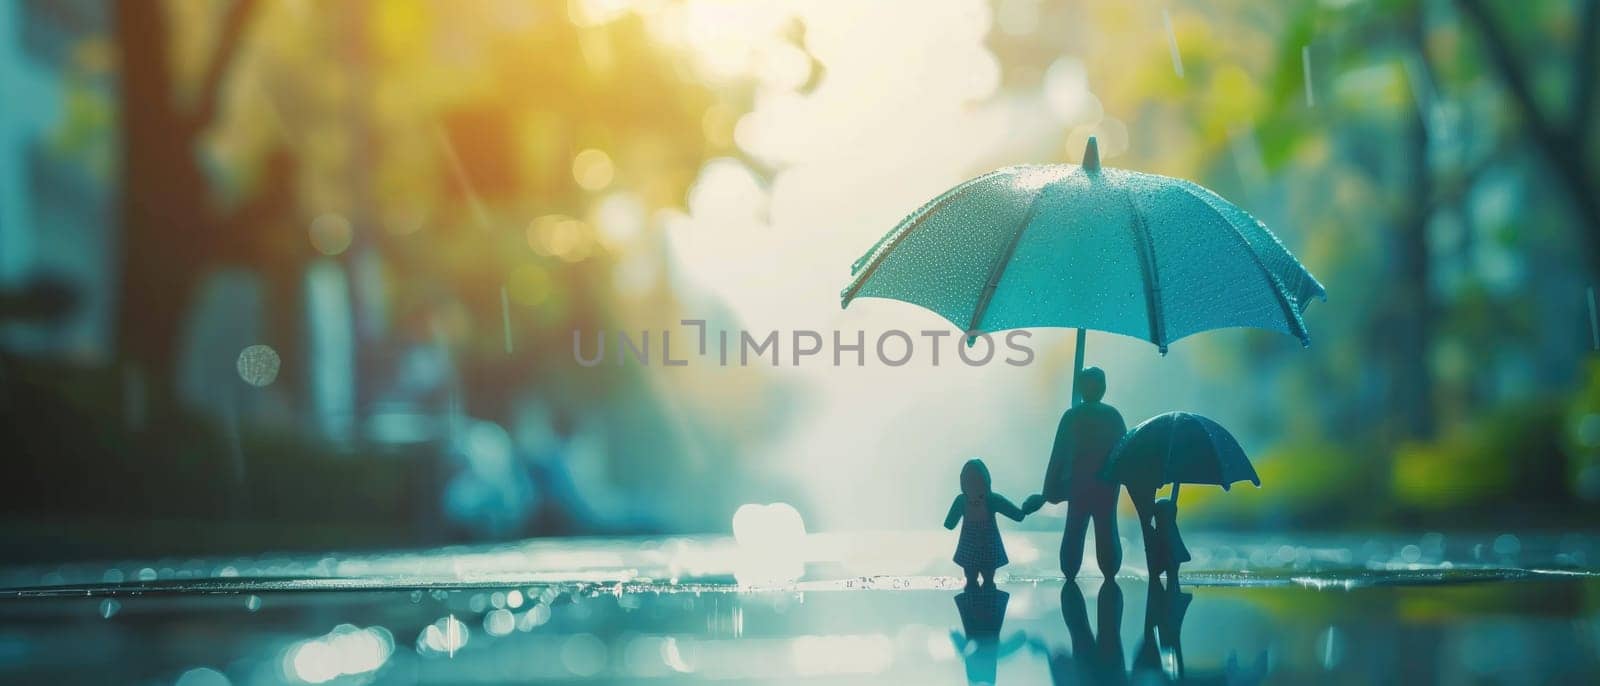 A small orange car is sitting in a puddle with a blue umbrella over it by AI generated image.